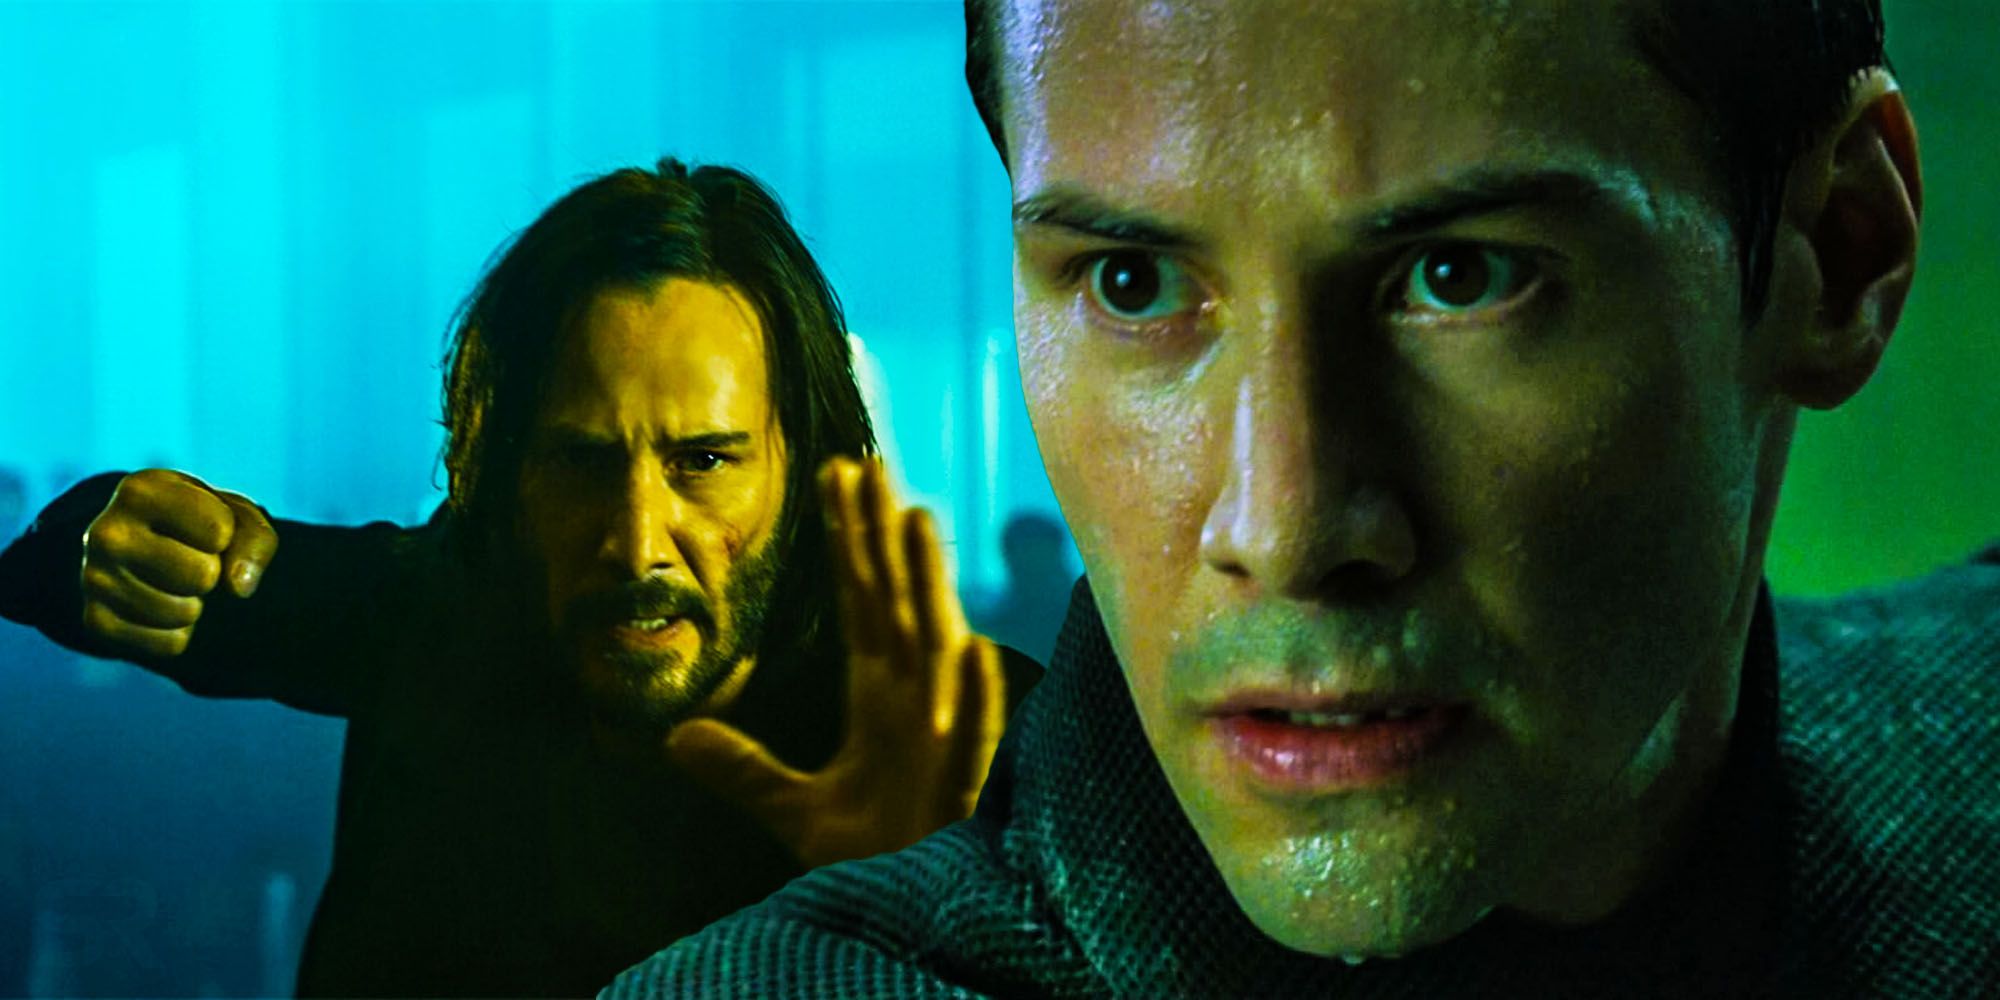 How powerful is neo in matrix resurrections compared to original trilogy